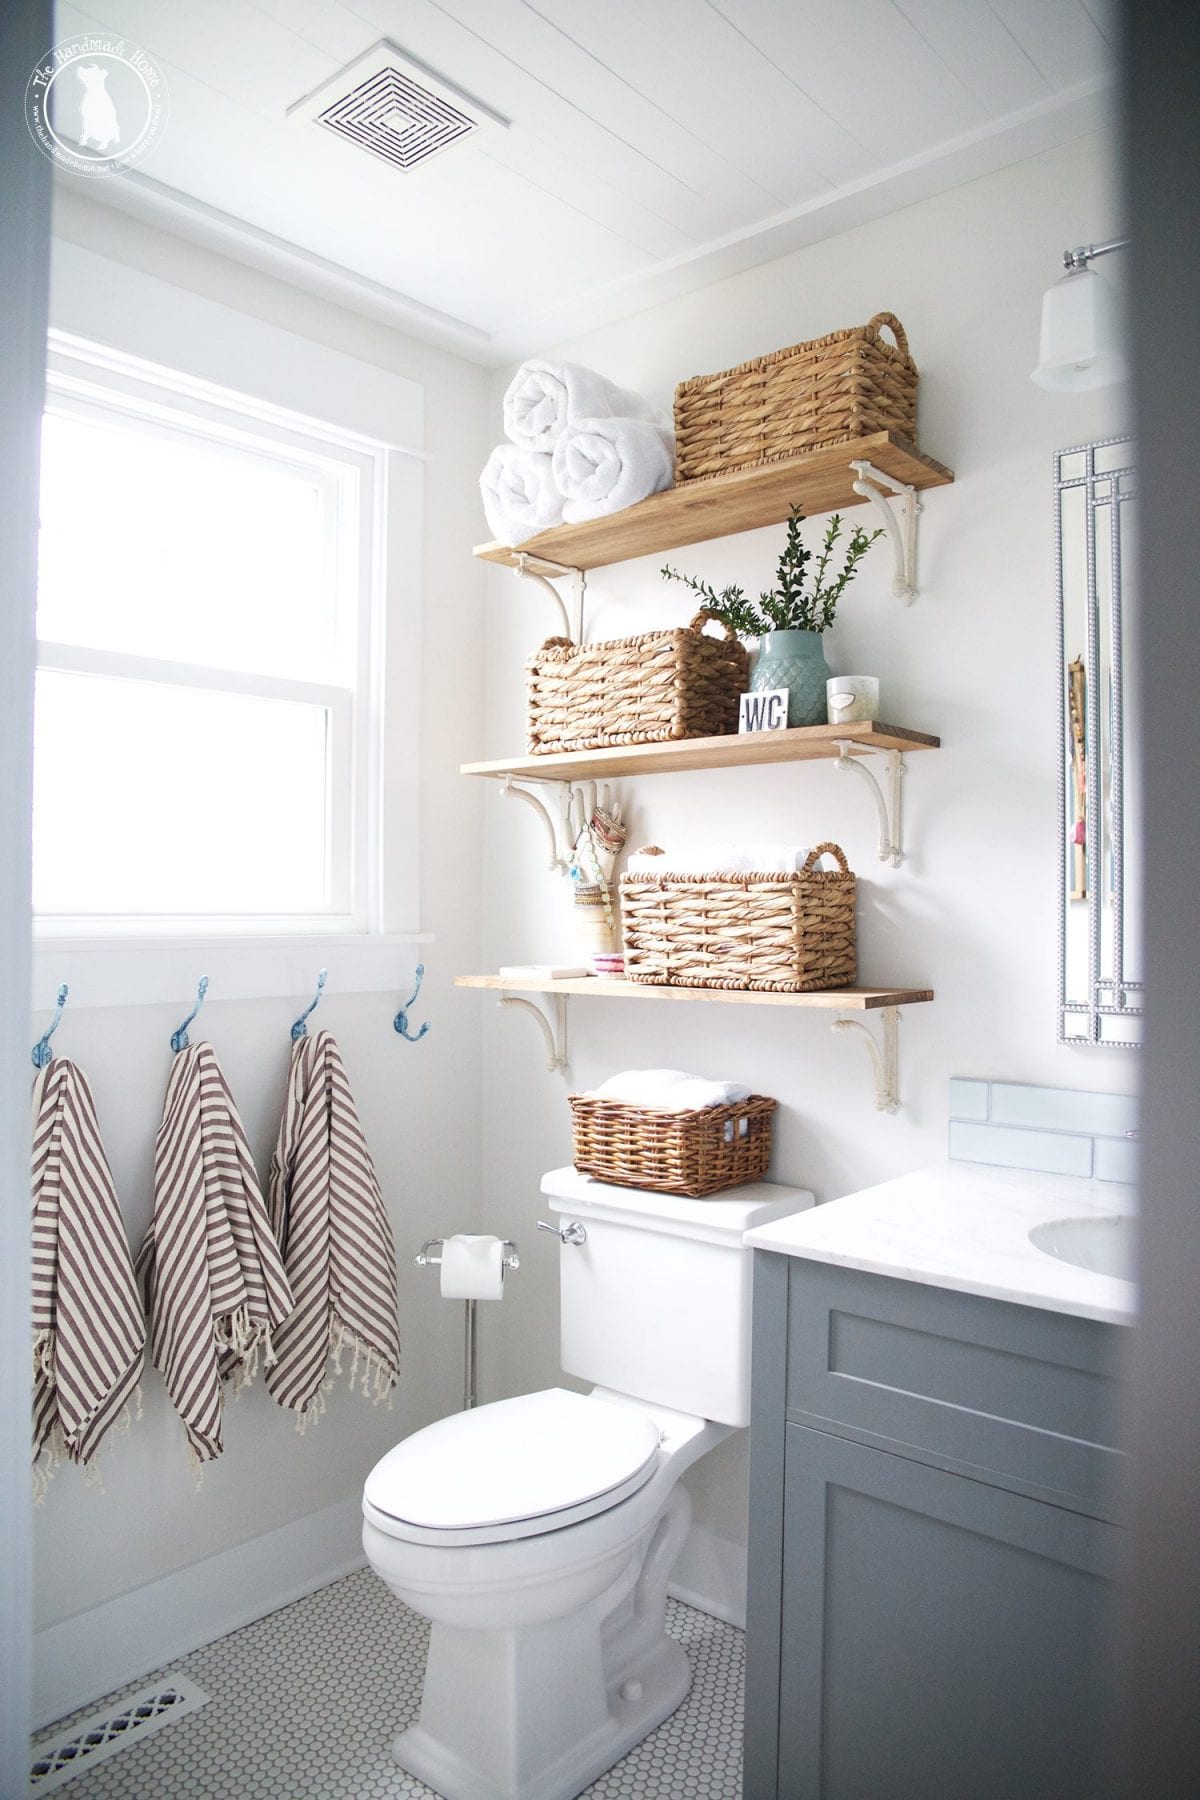 Neat bathroom organized with shelves, baskets and hooks for towels.